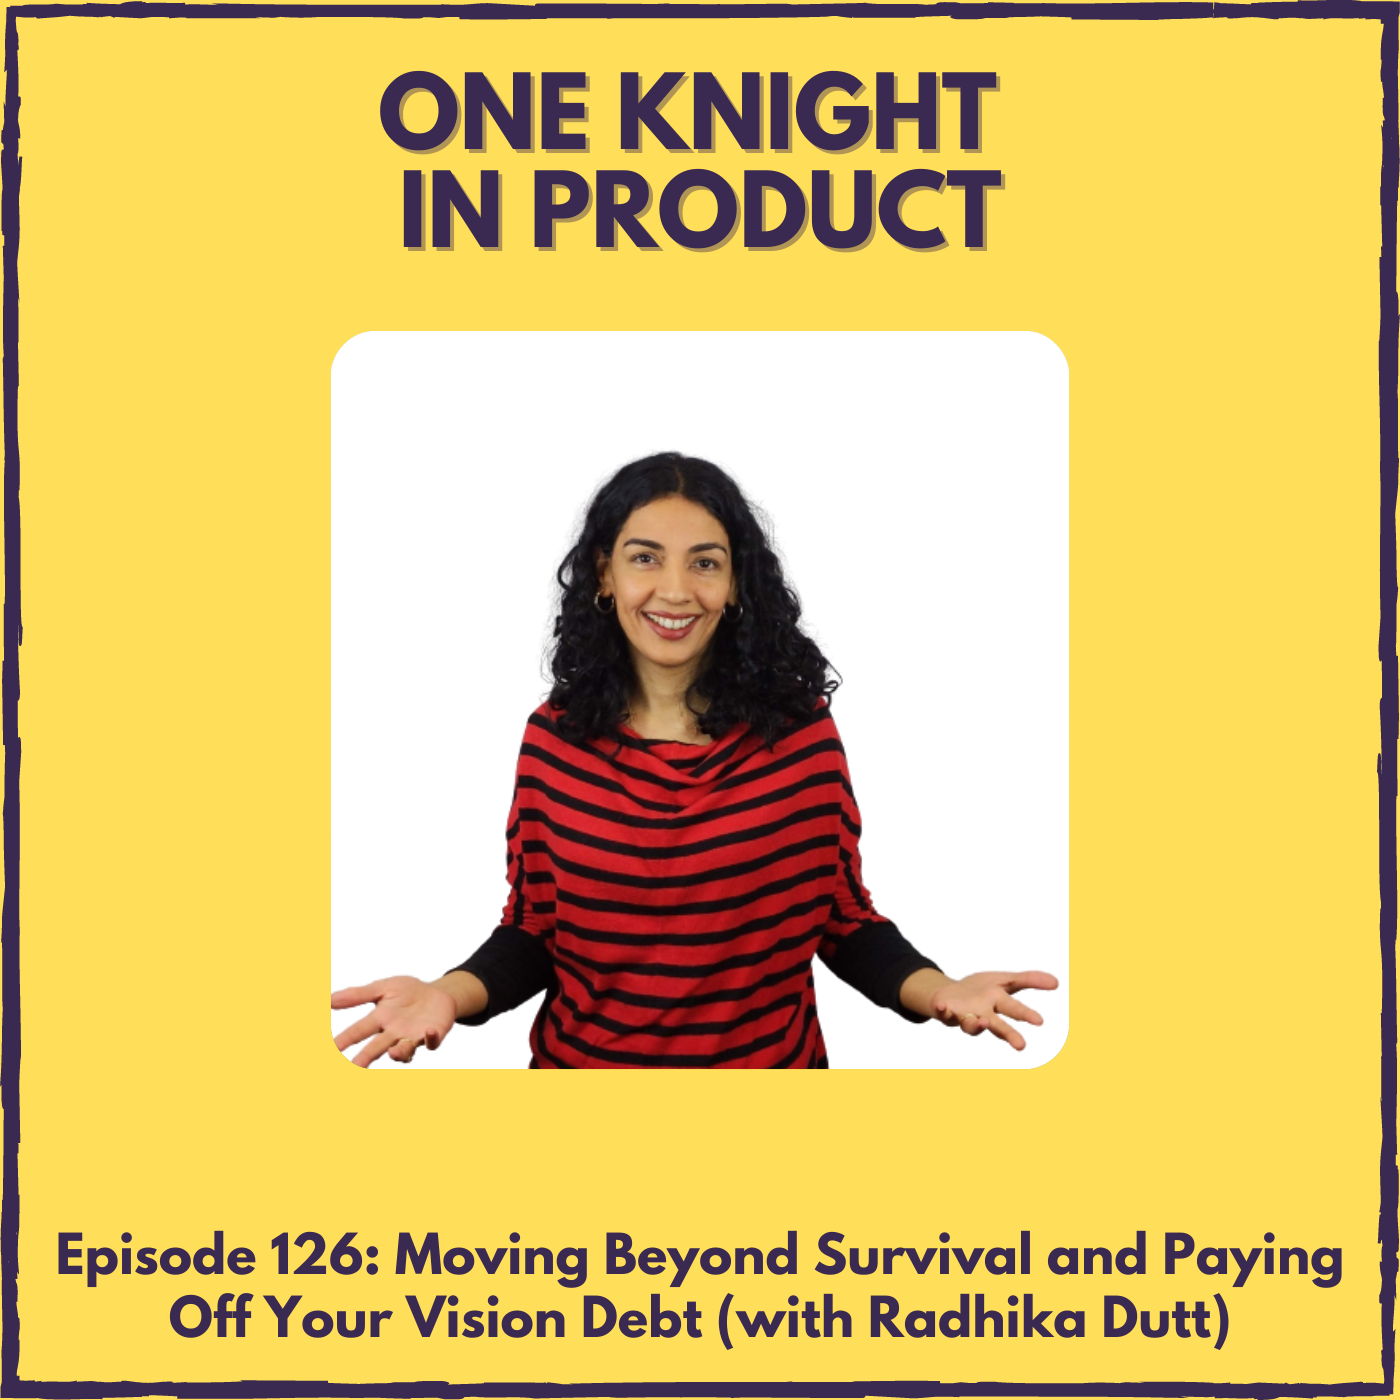 Moving Beyond Survival and Paying Off Your Vision Debt (with Radhika Dutt, author ”Radical Product Thinking”)